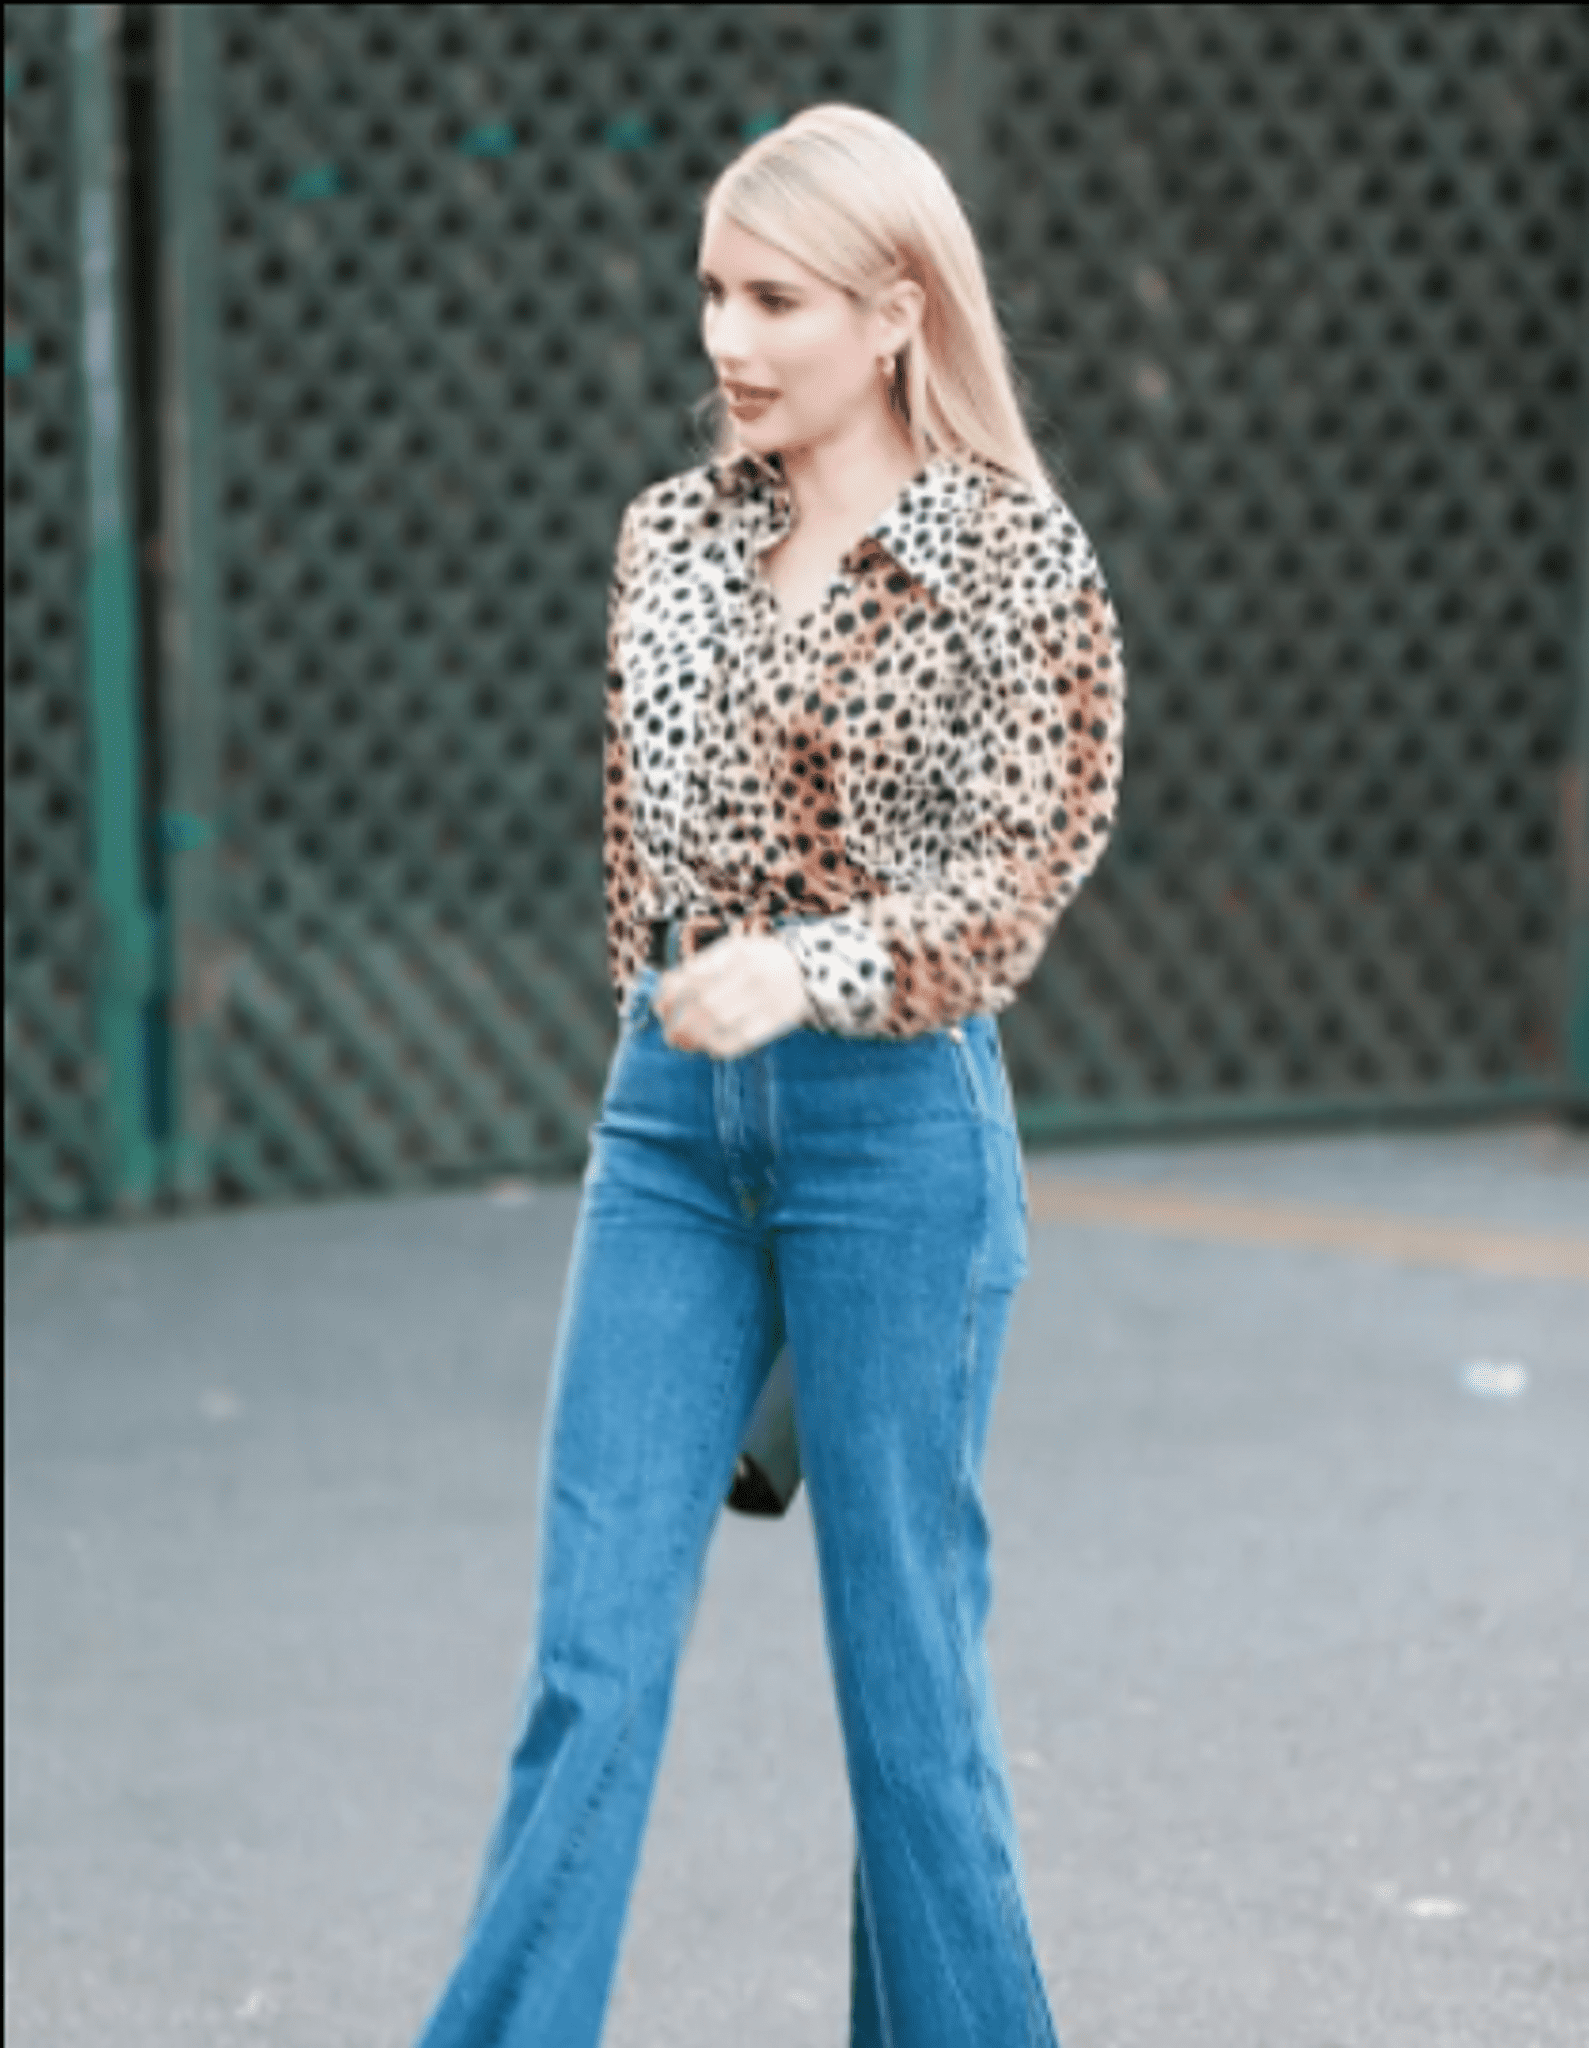 Young mother Emma Roberts showed a simple way to go out